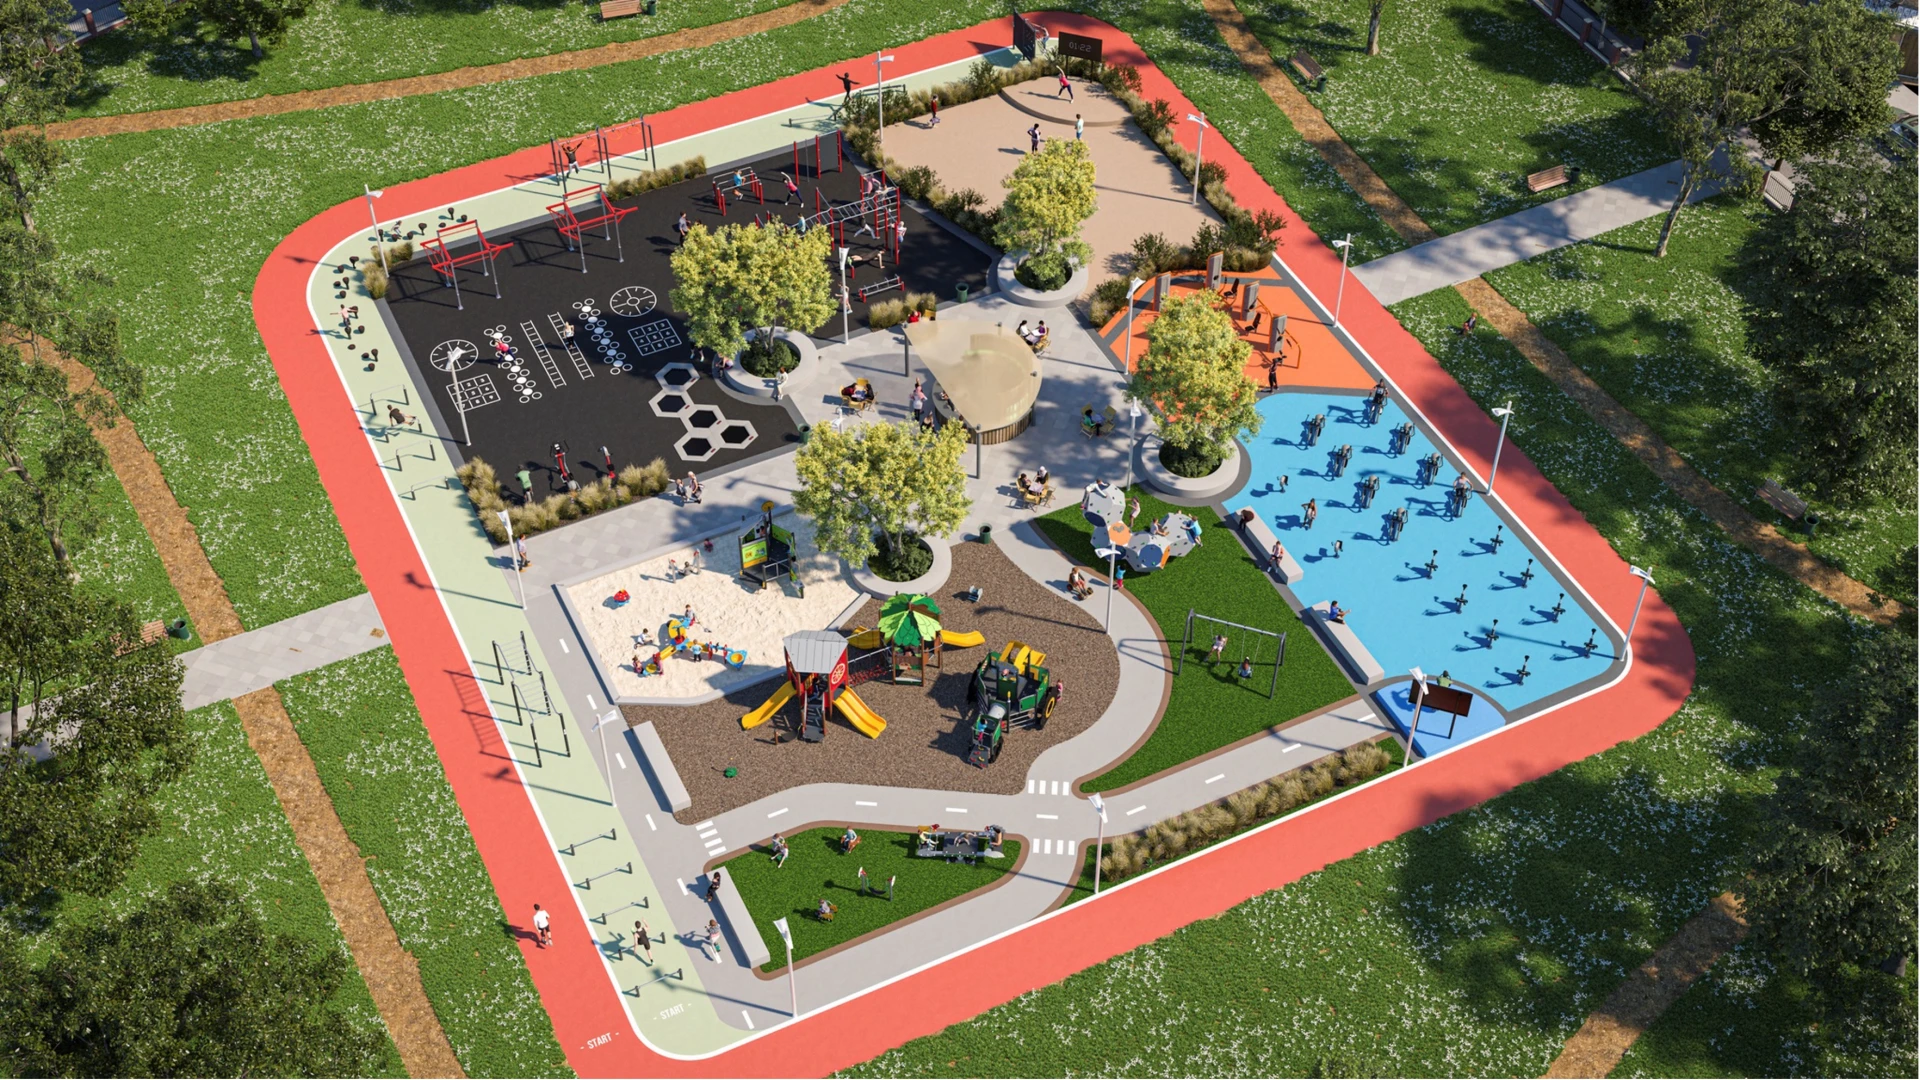 An aerial view of a playground and outdoor gym in a park 